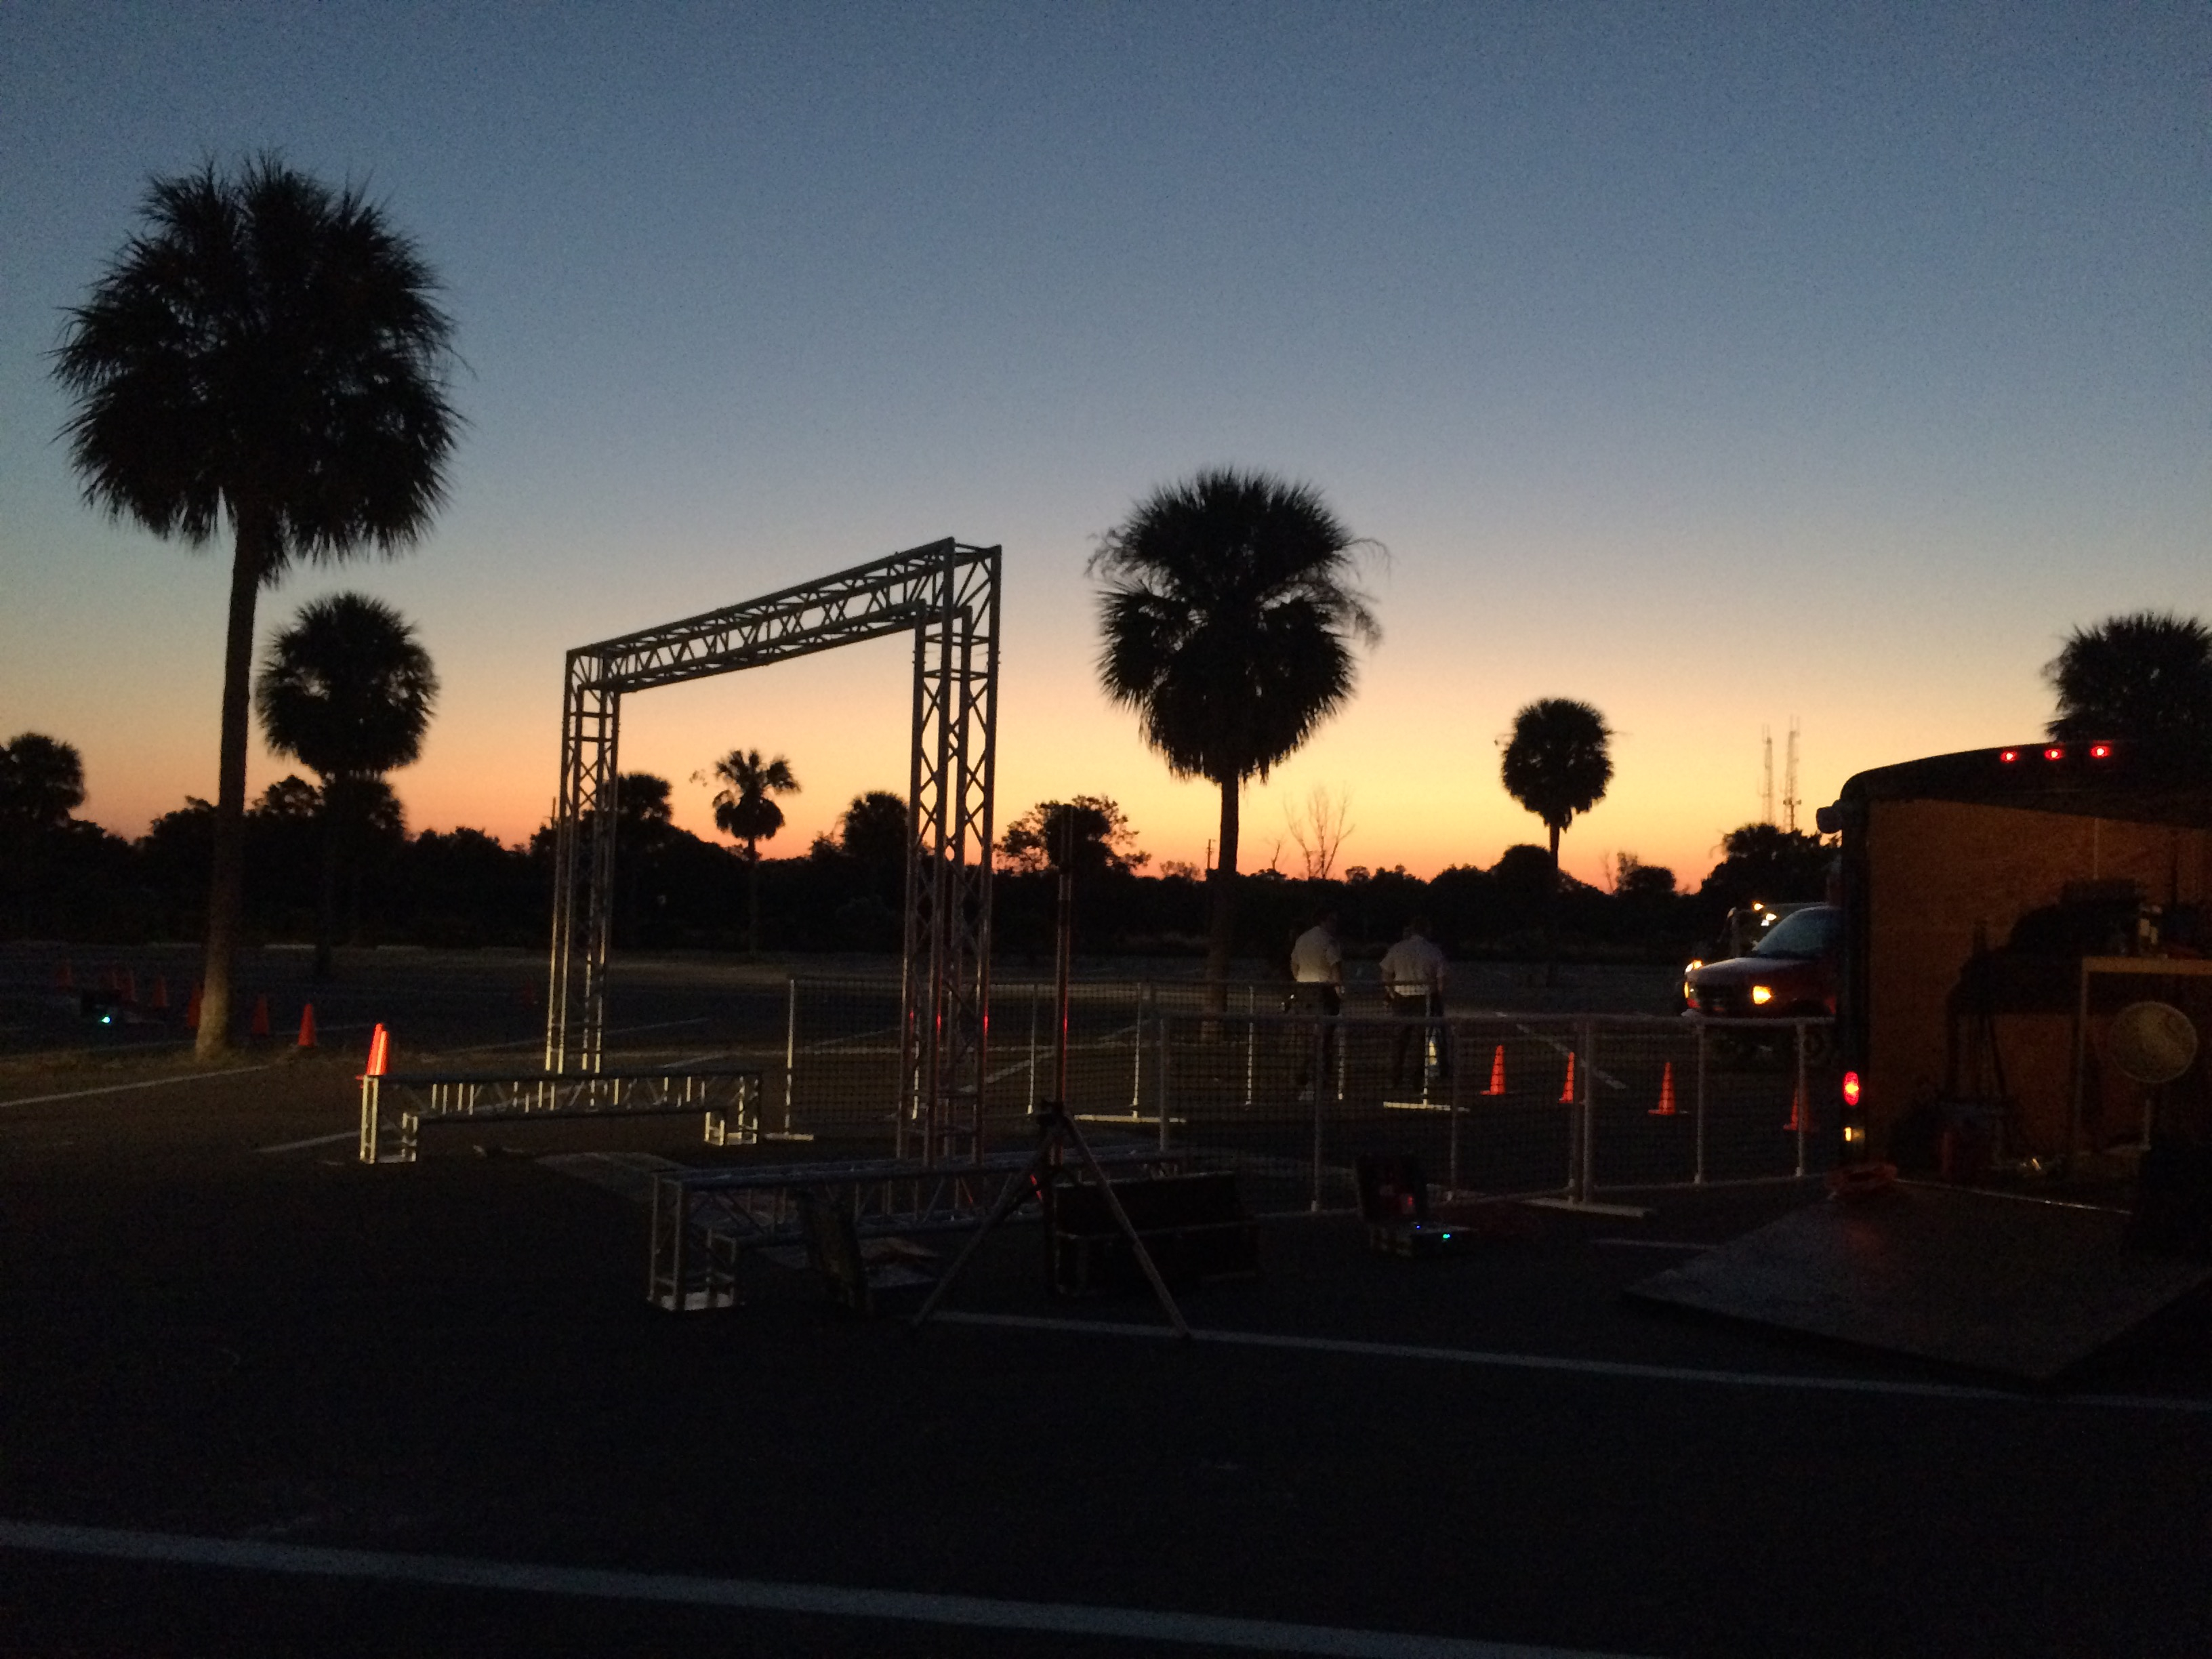 The Start/Finish Line is constructed before the race.